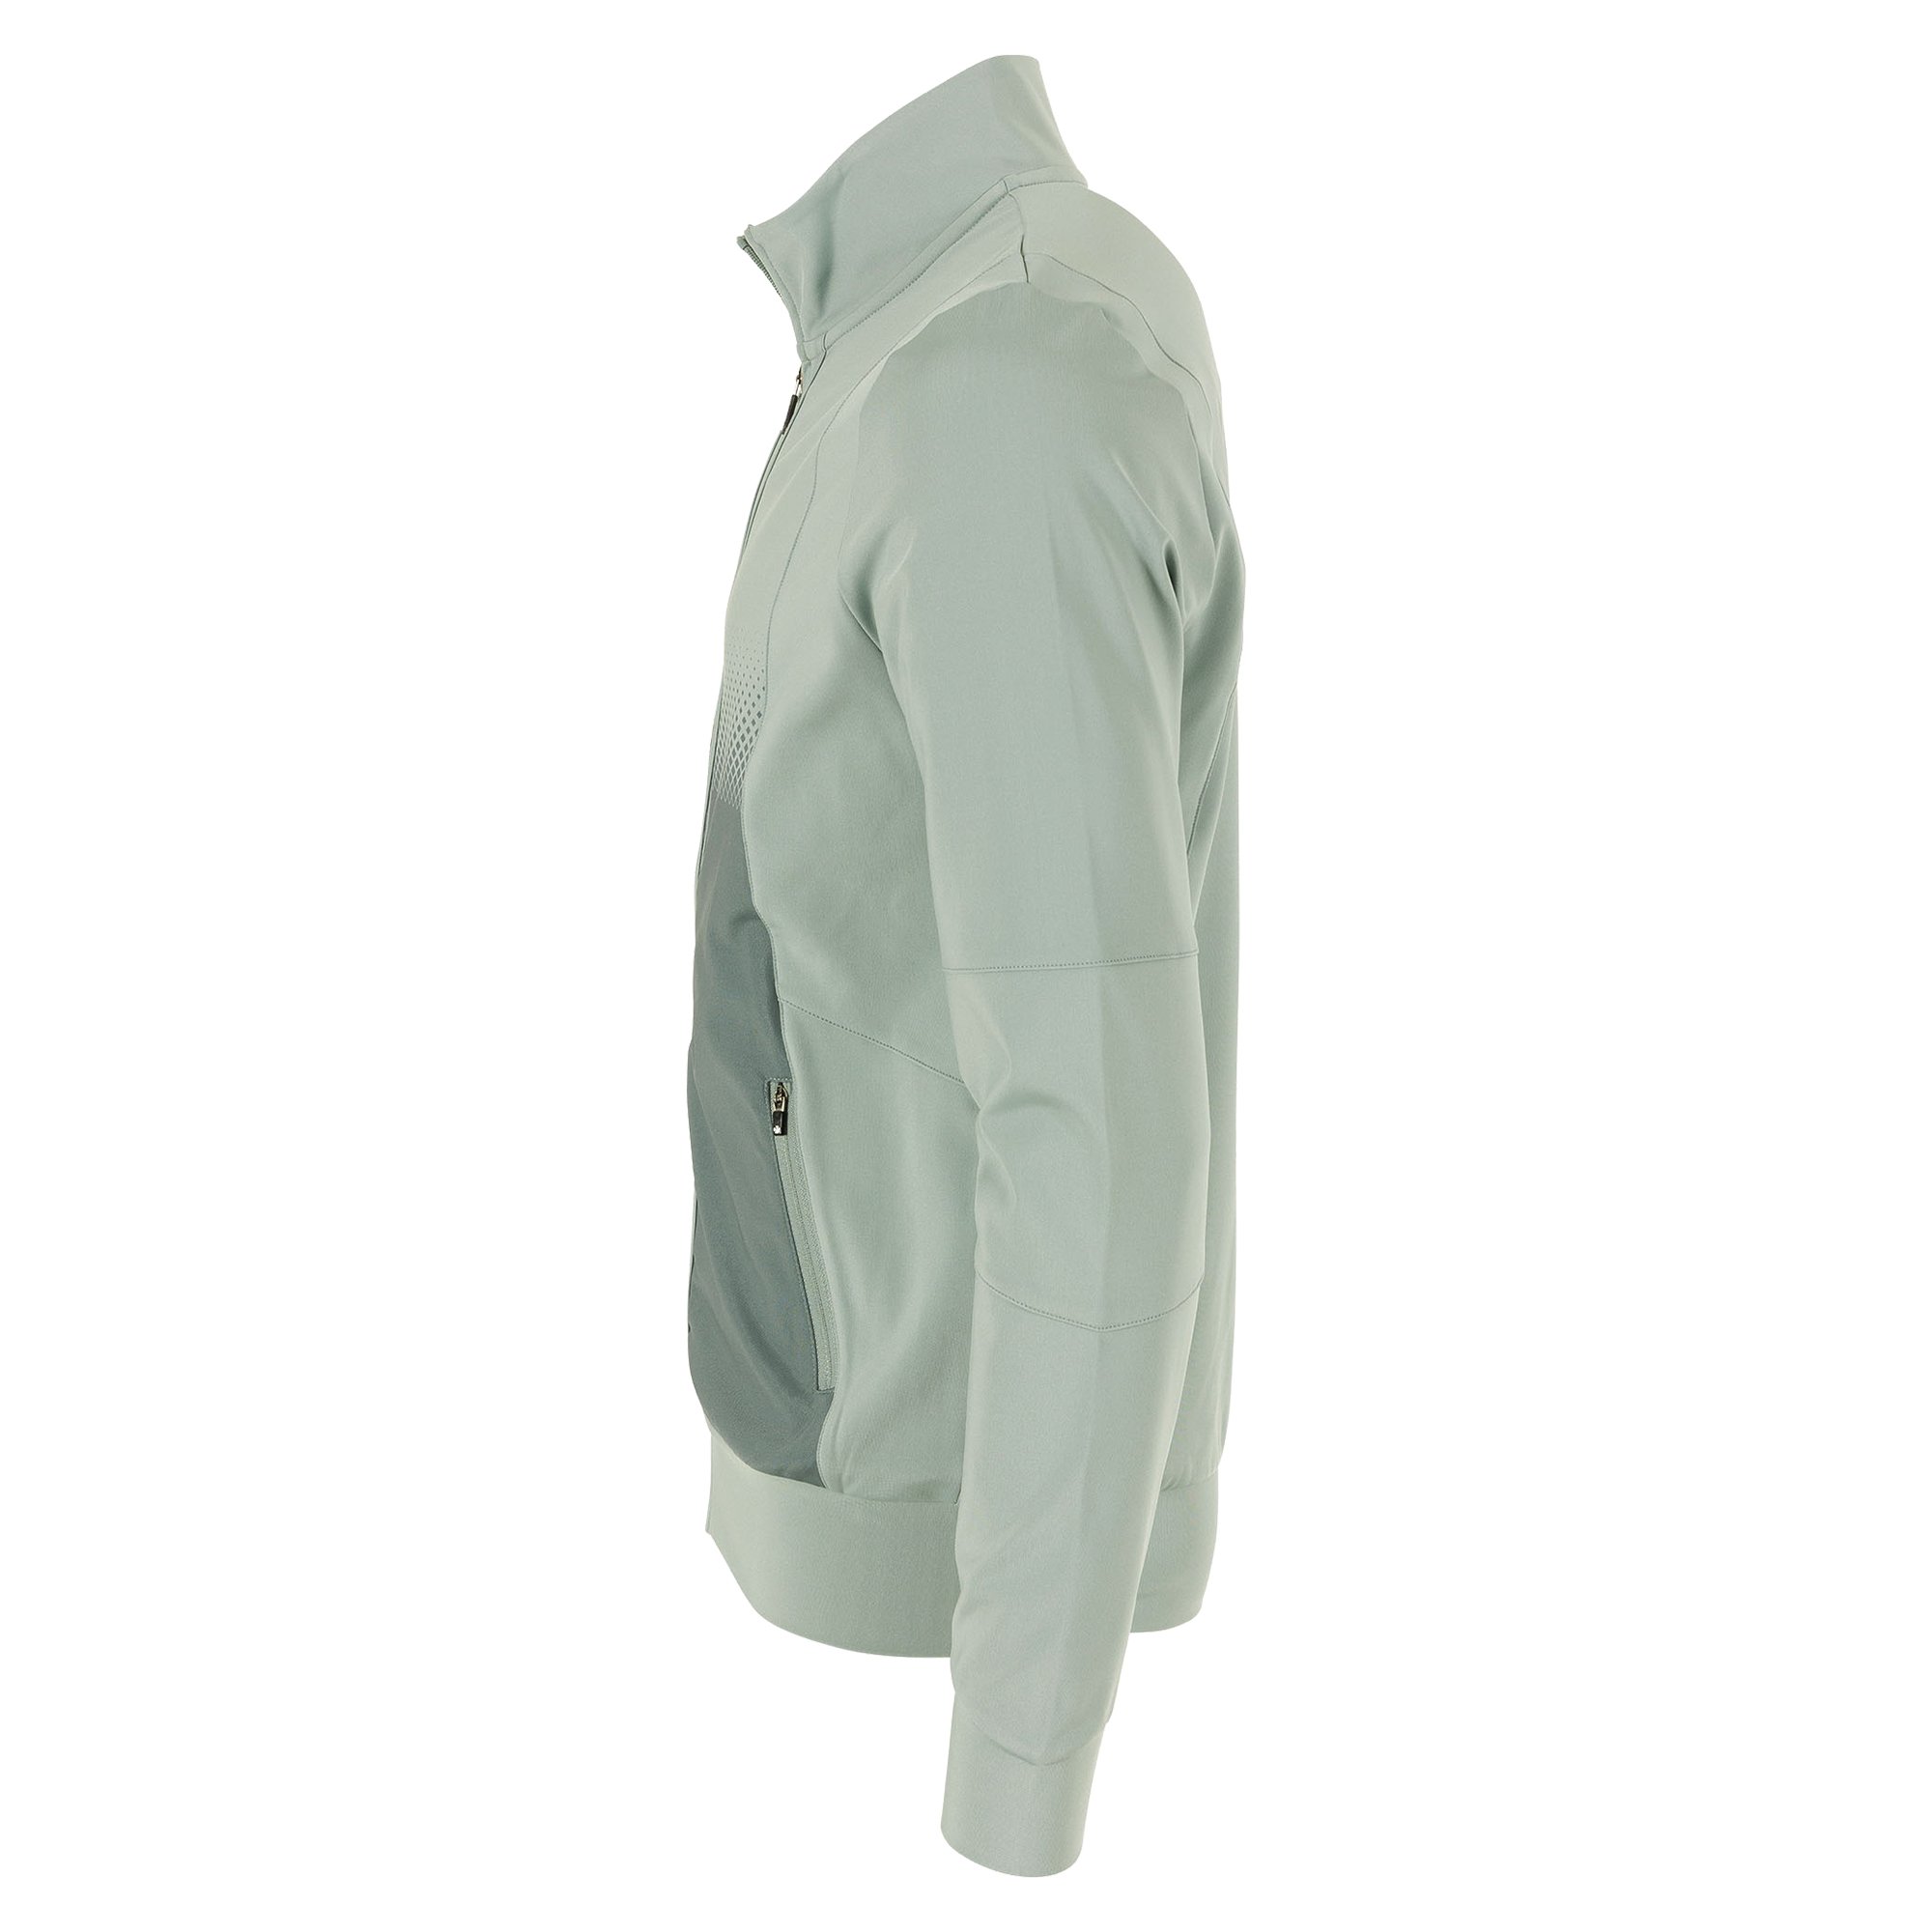 Reece Australia Cleve Stretched Fit Jacket Full Zip